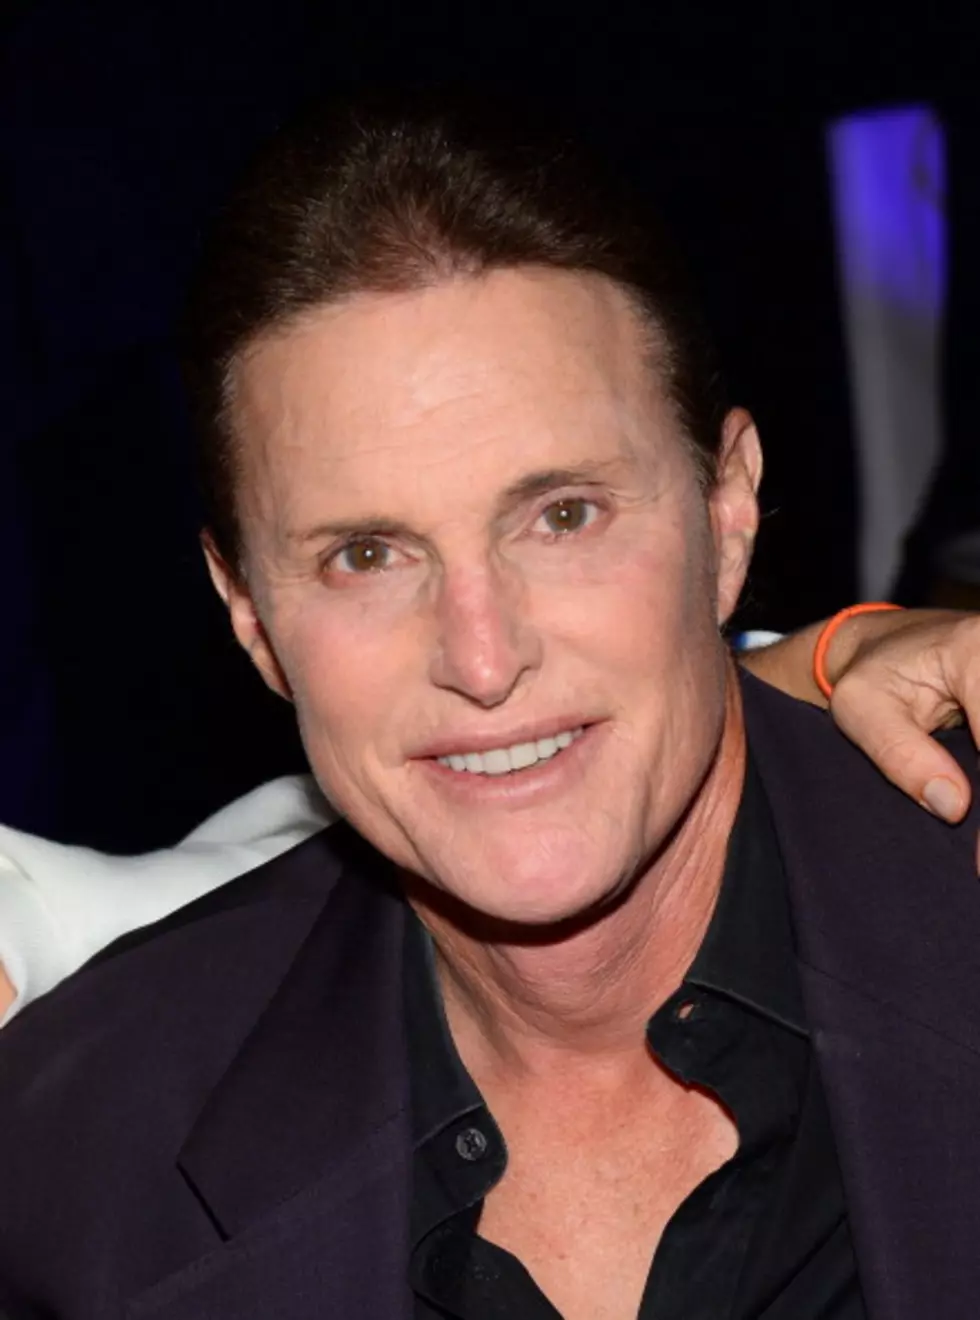 &#8216;Bruce Jenner &#8212; The Interview&#8217; Promo [VIDEO]